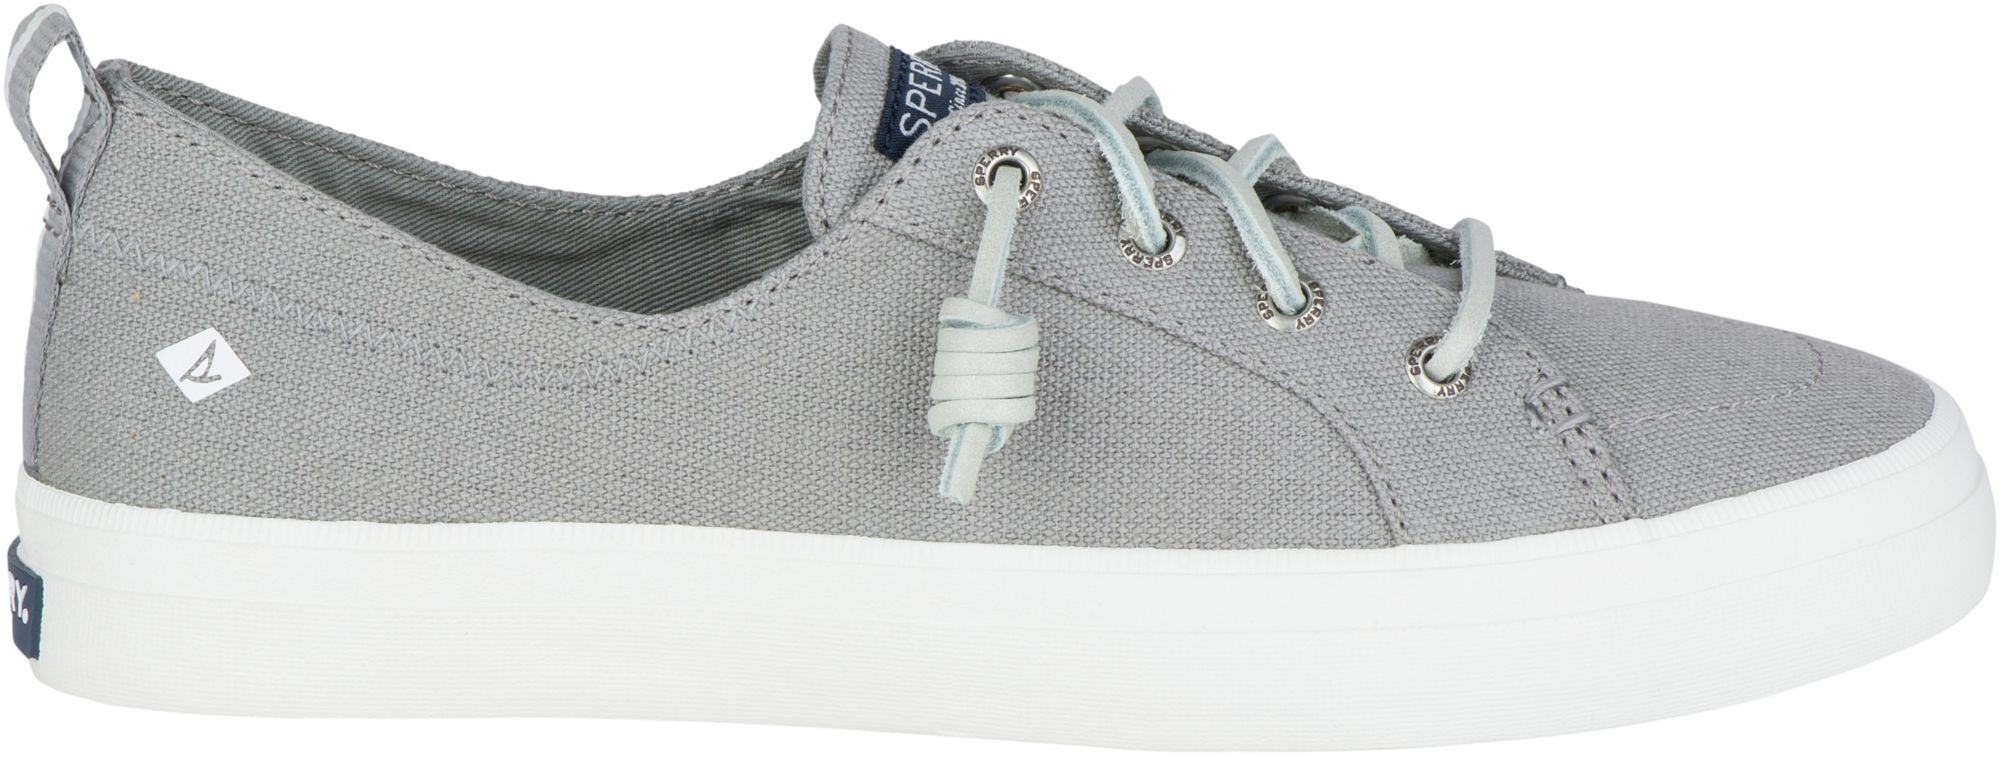 Sperry Women's Crest Vibe Casual Shoes 